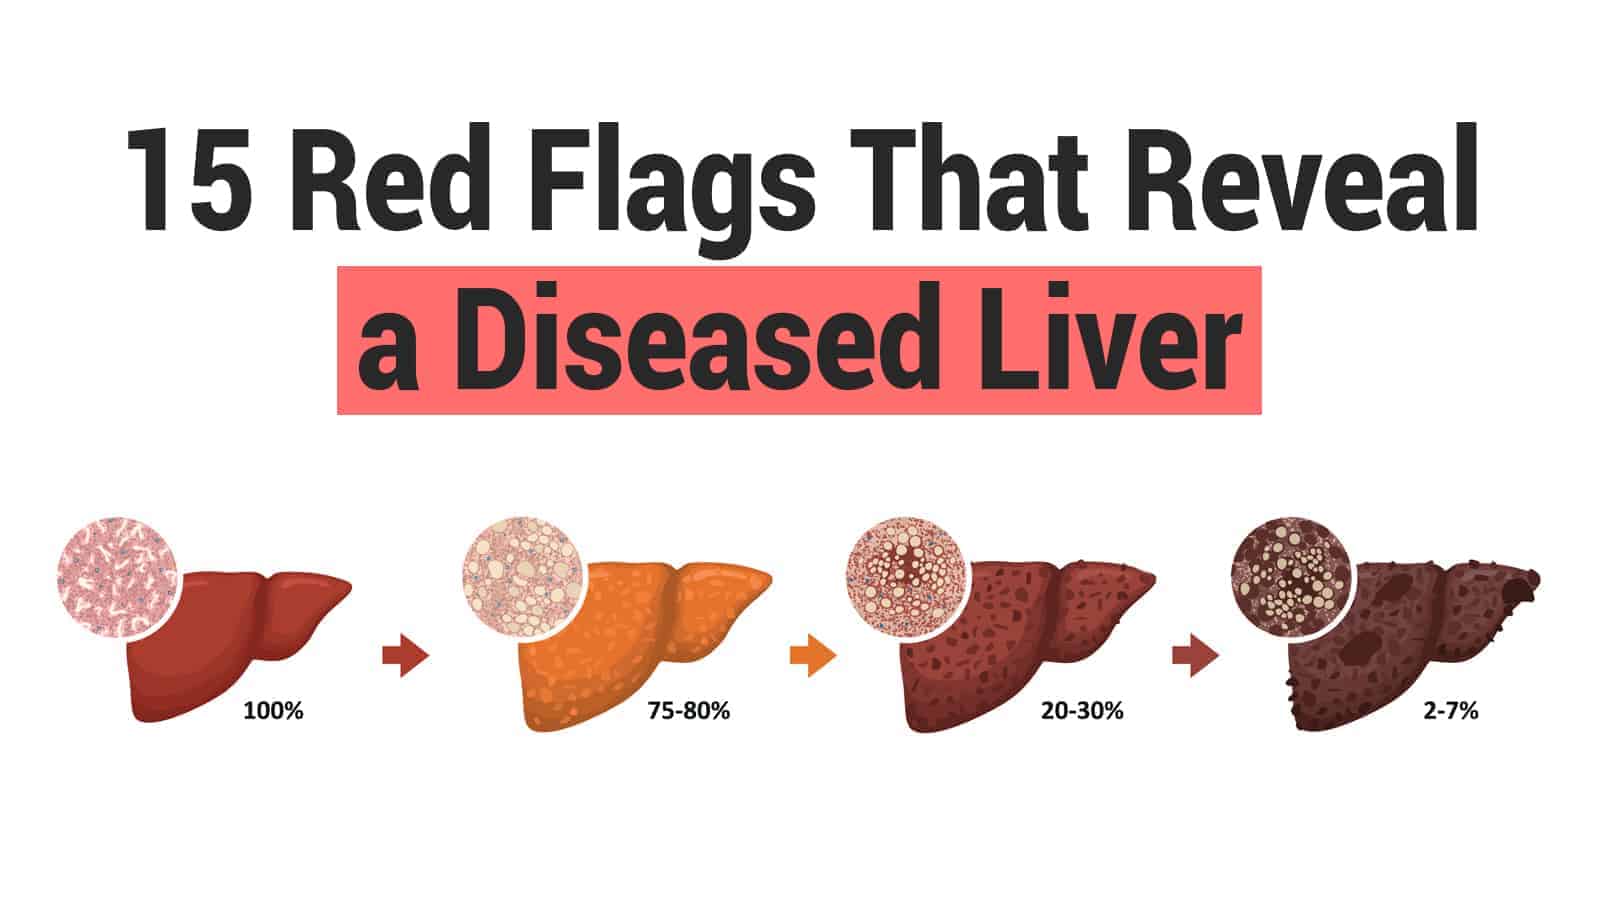 15 Red Flags That Reveal a Diseased Liver